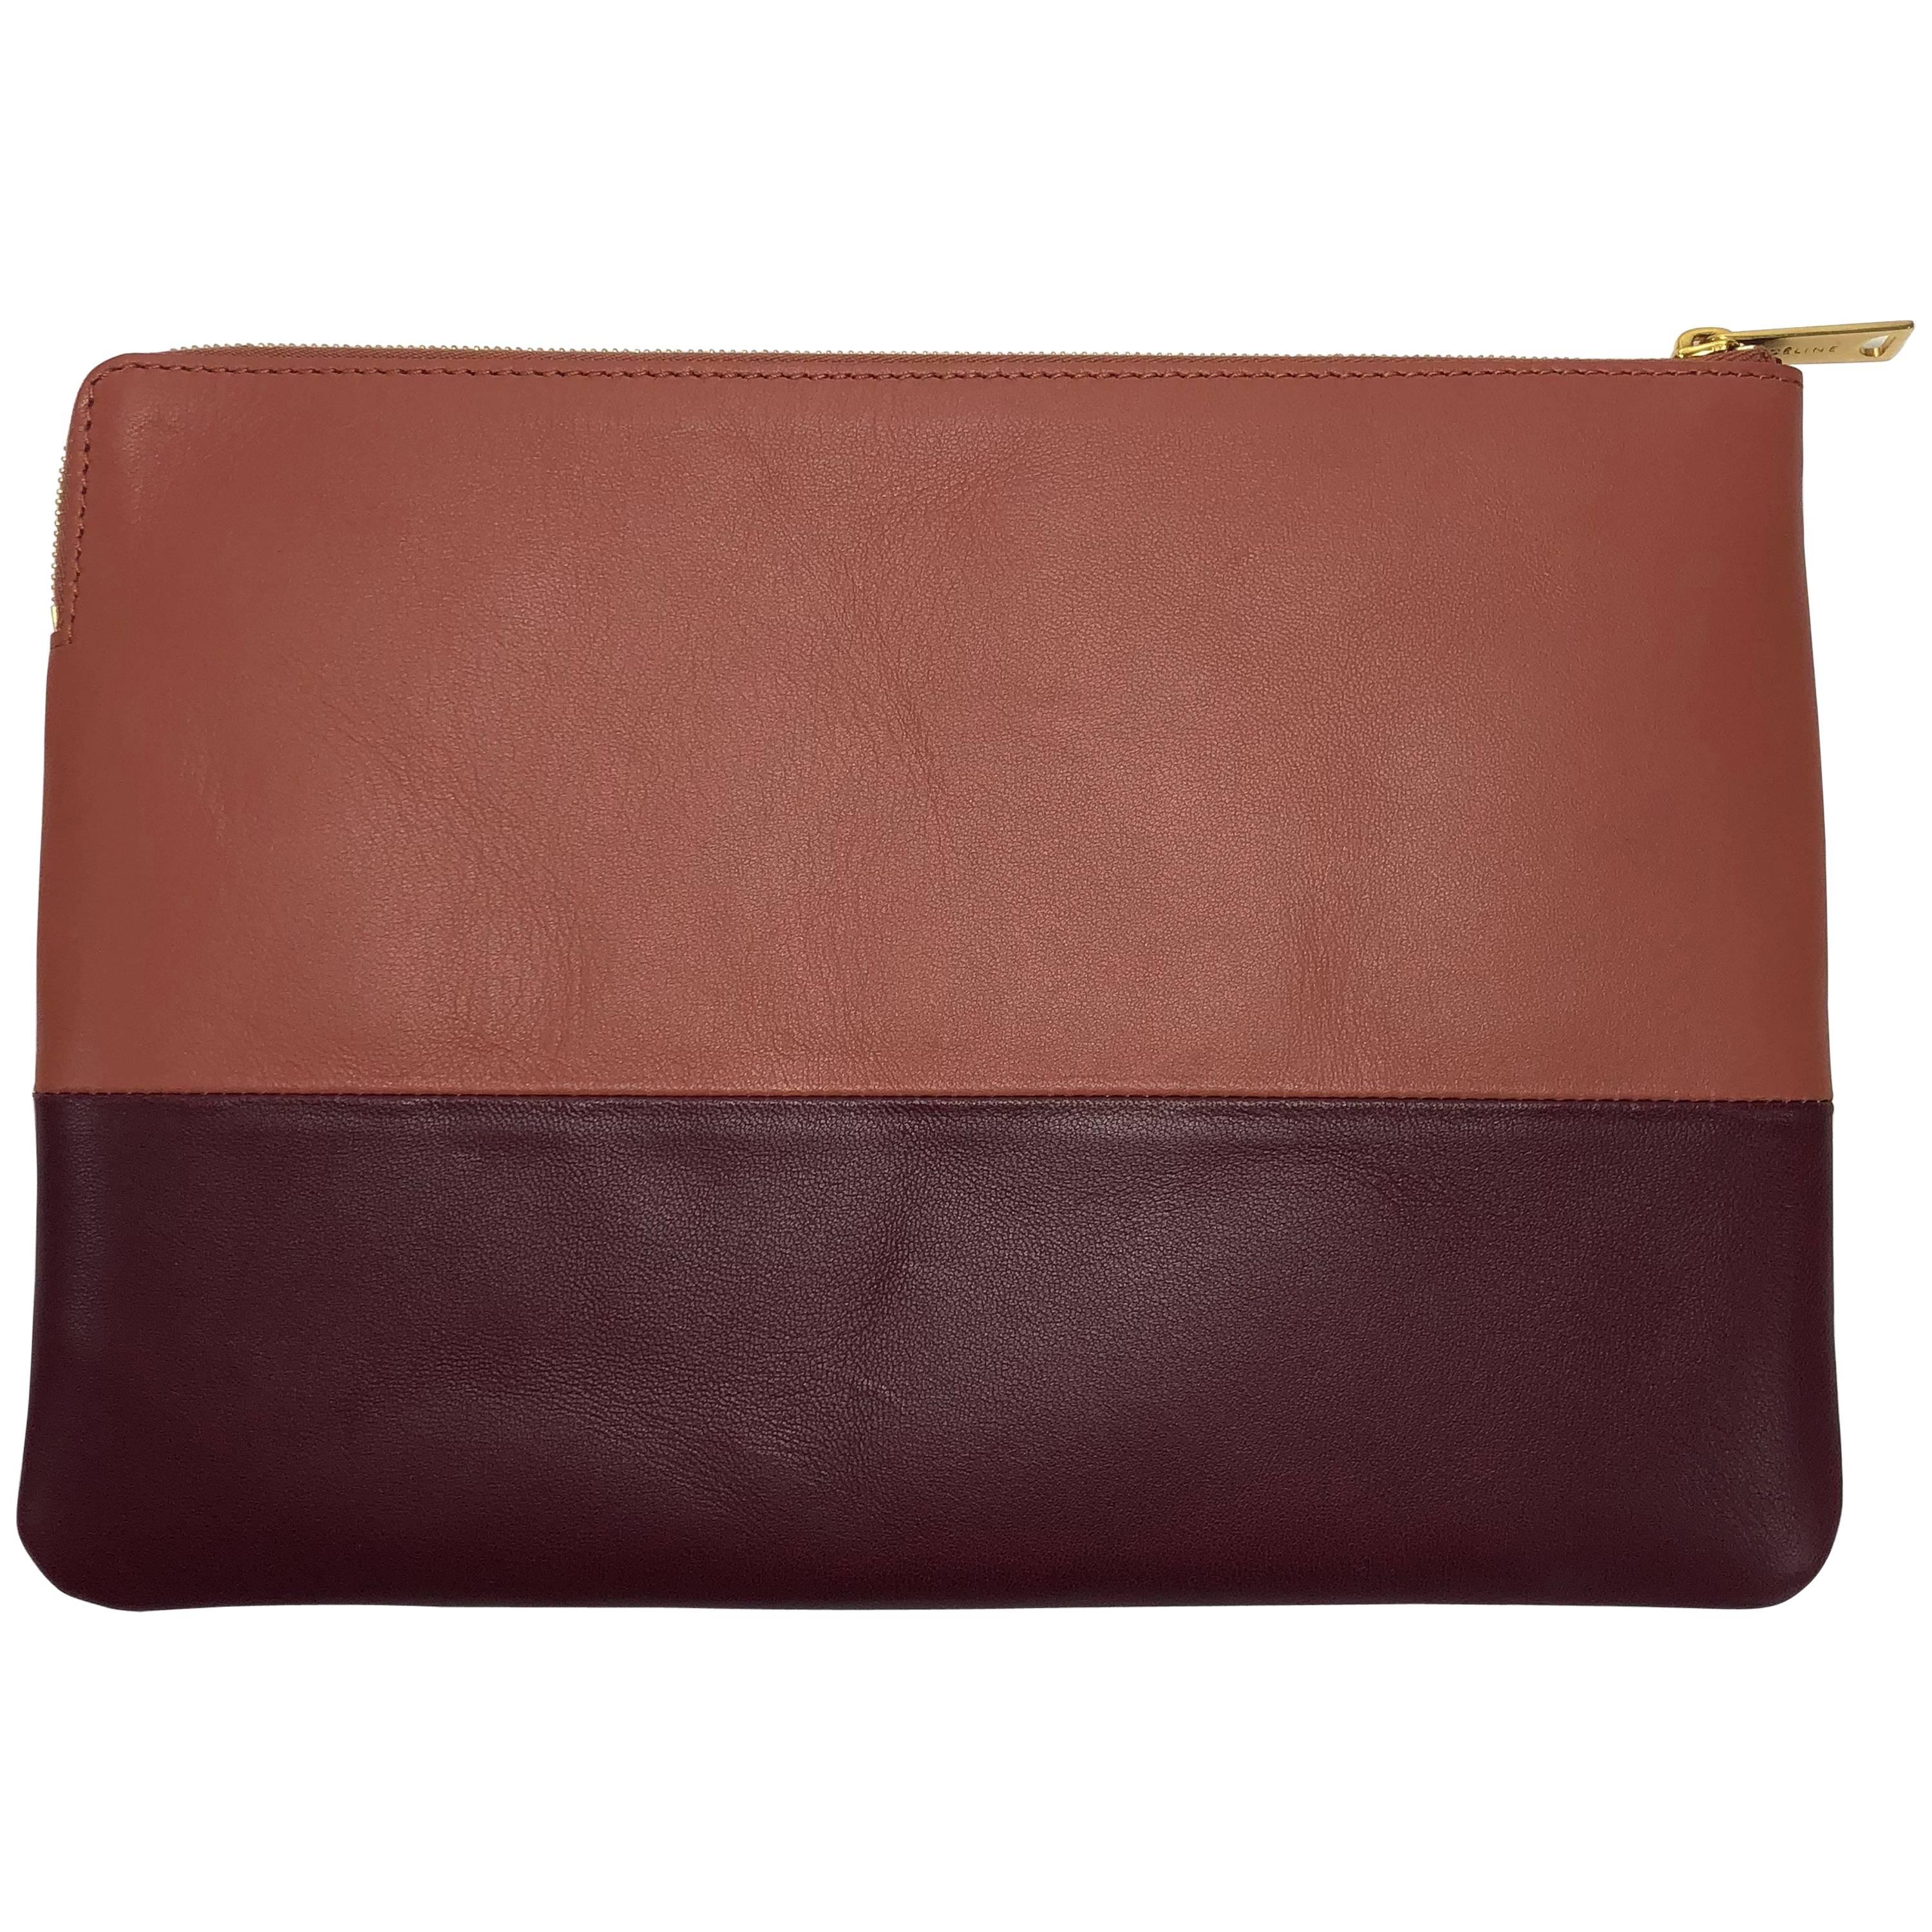 Celine Contrasting Leather Pouch with Gold Hardware For Sale